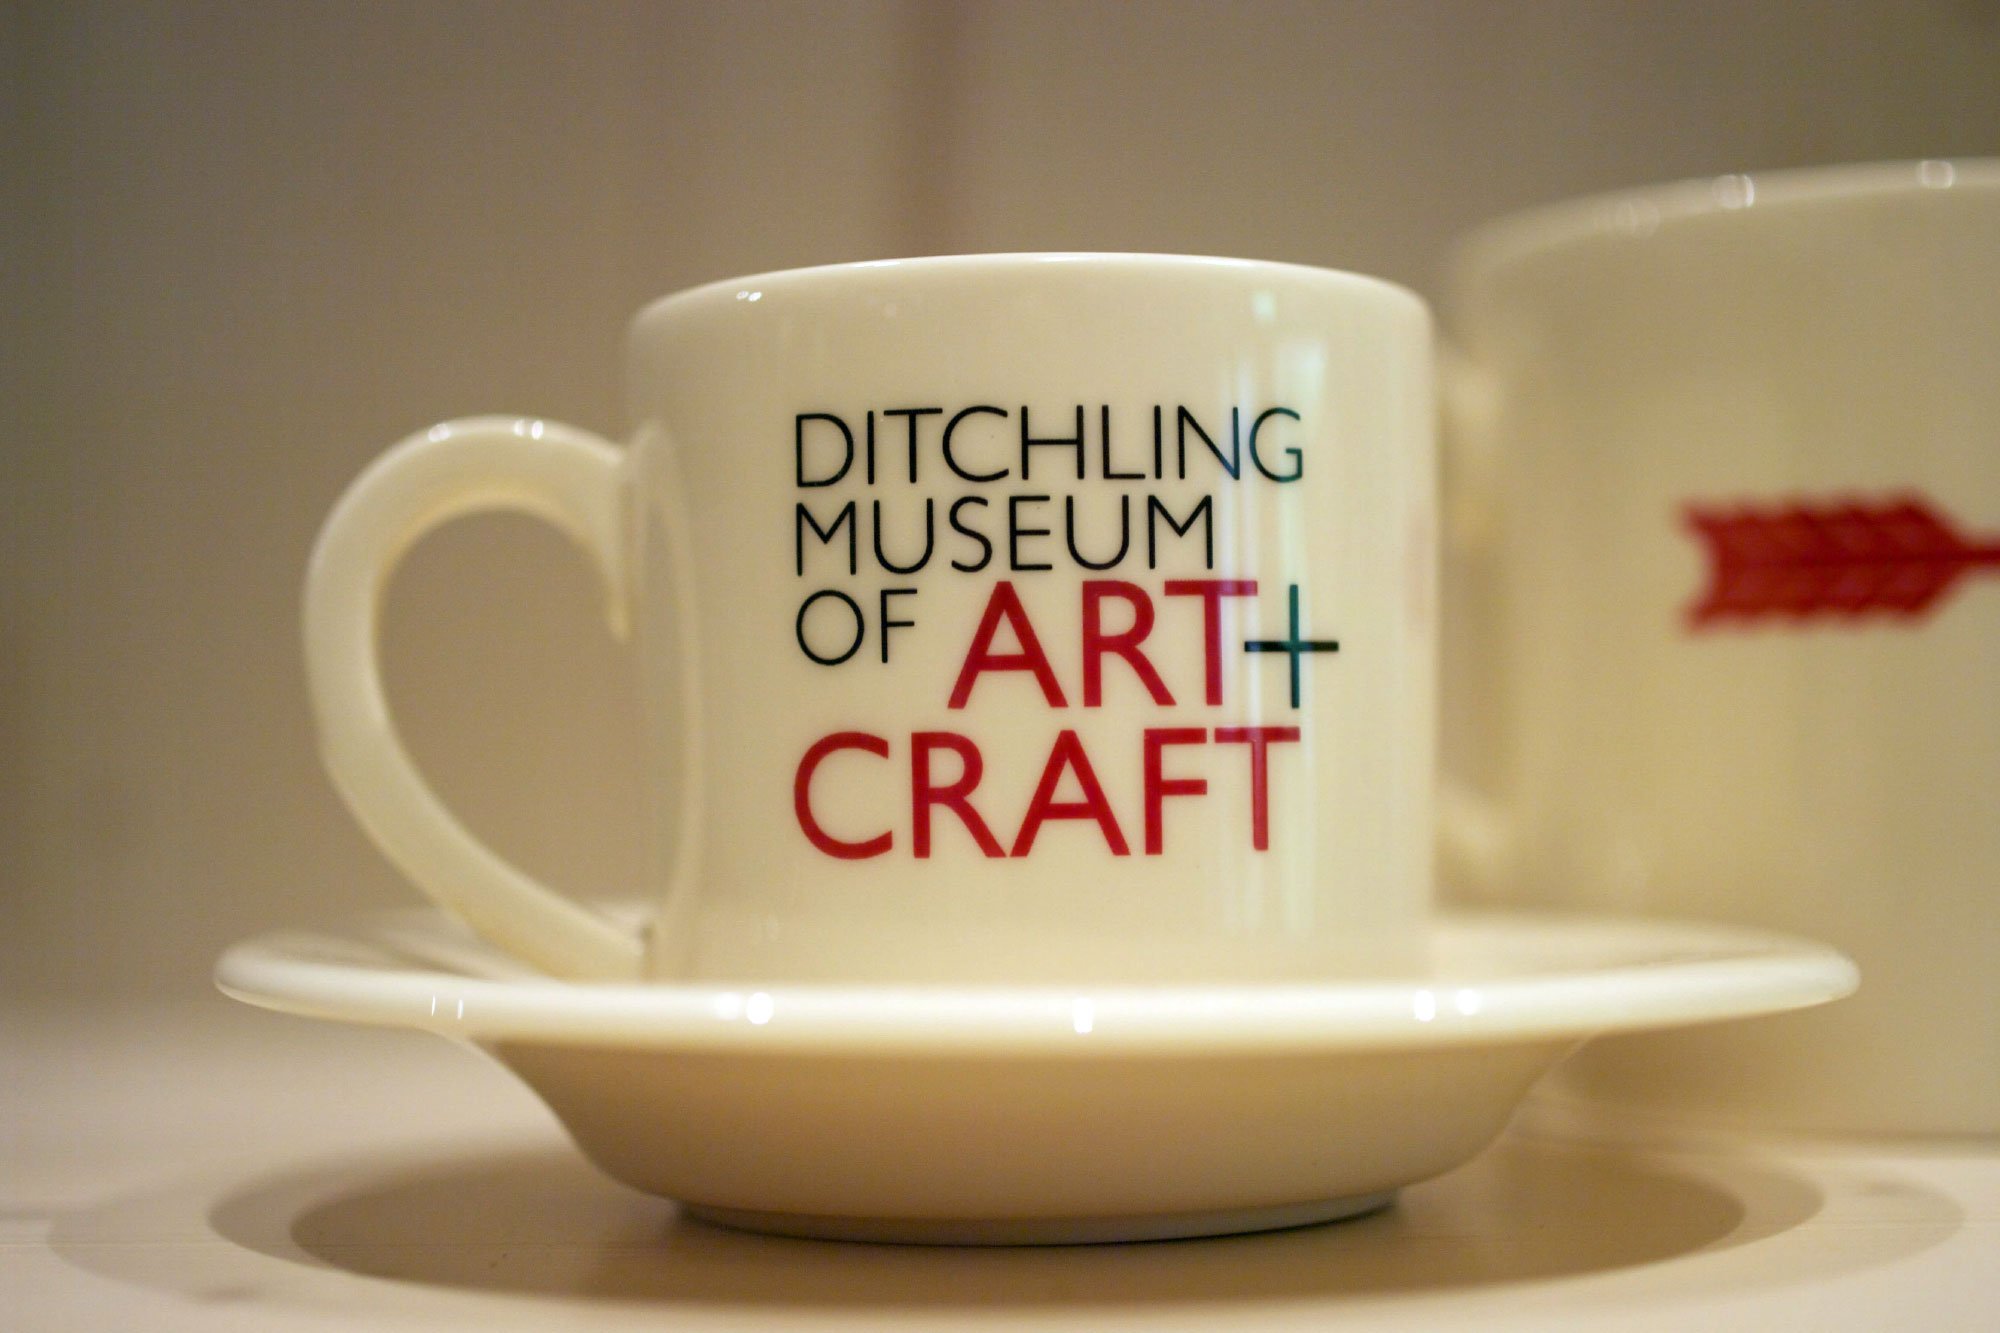  Ditchling Museum of Art + Craft: Bone china mug for Ditchling Museum of Art + Craft with lettering by Phil Baines after Eric Gill. 2013 